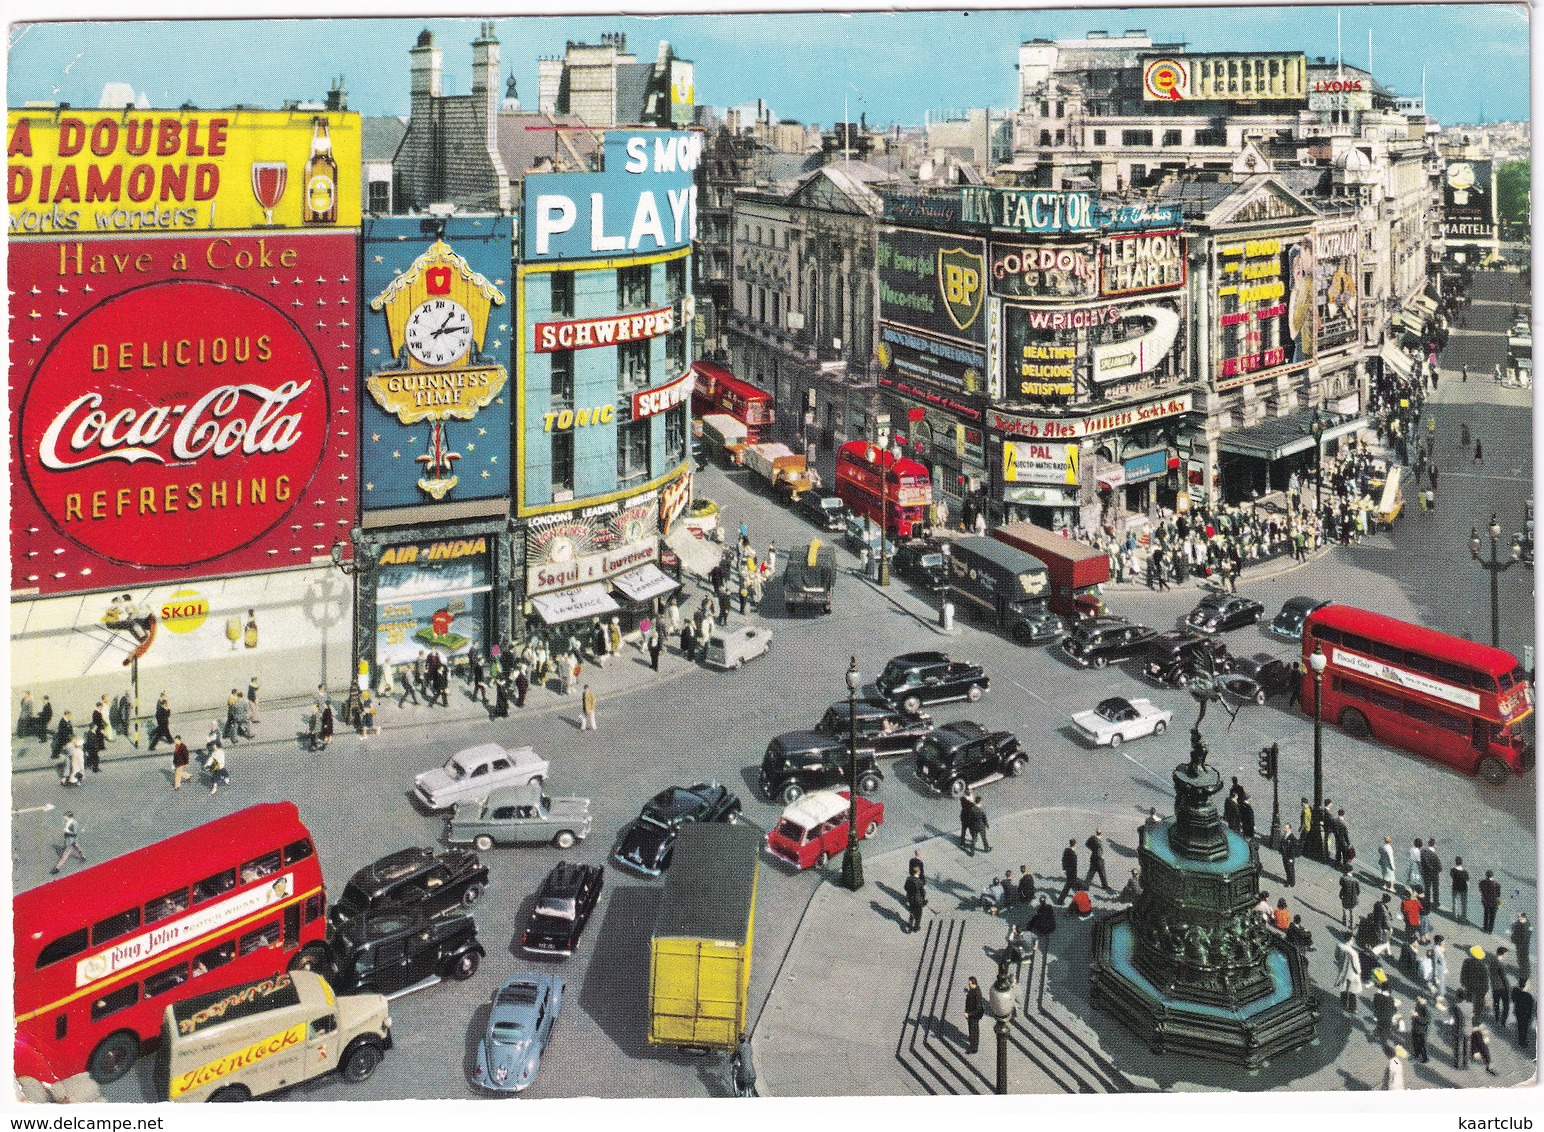 London: VW 1200 KÄFER/COX, ARMSTRONG-SIDDELEY SAPPHIRE, AUSTIN A40, A99, & FX, VAUXHALL VICTOR, VANS - Piccadilly Circus - Turismo